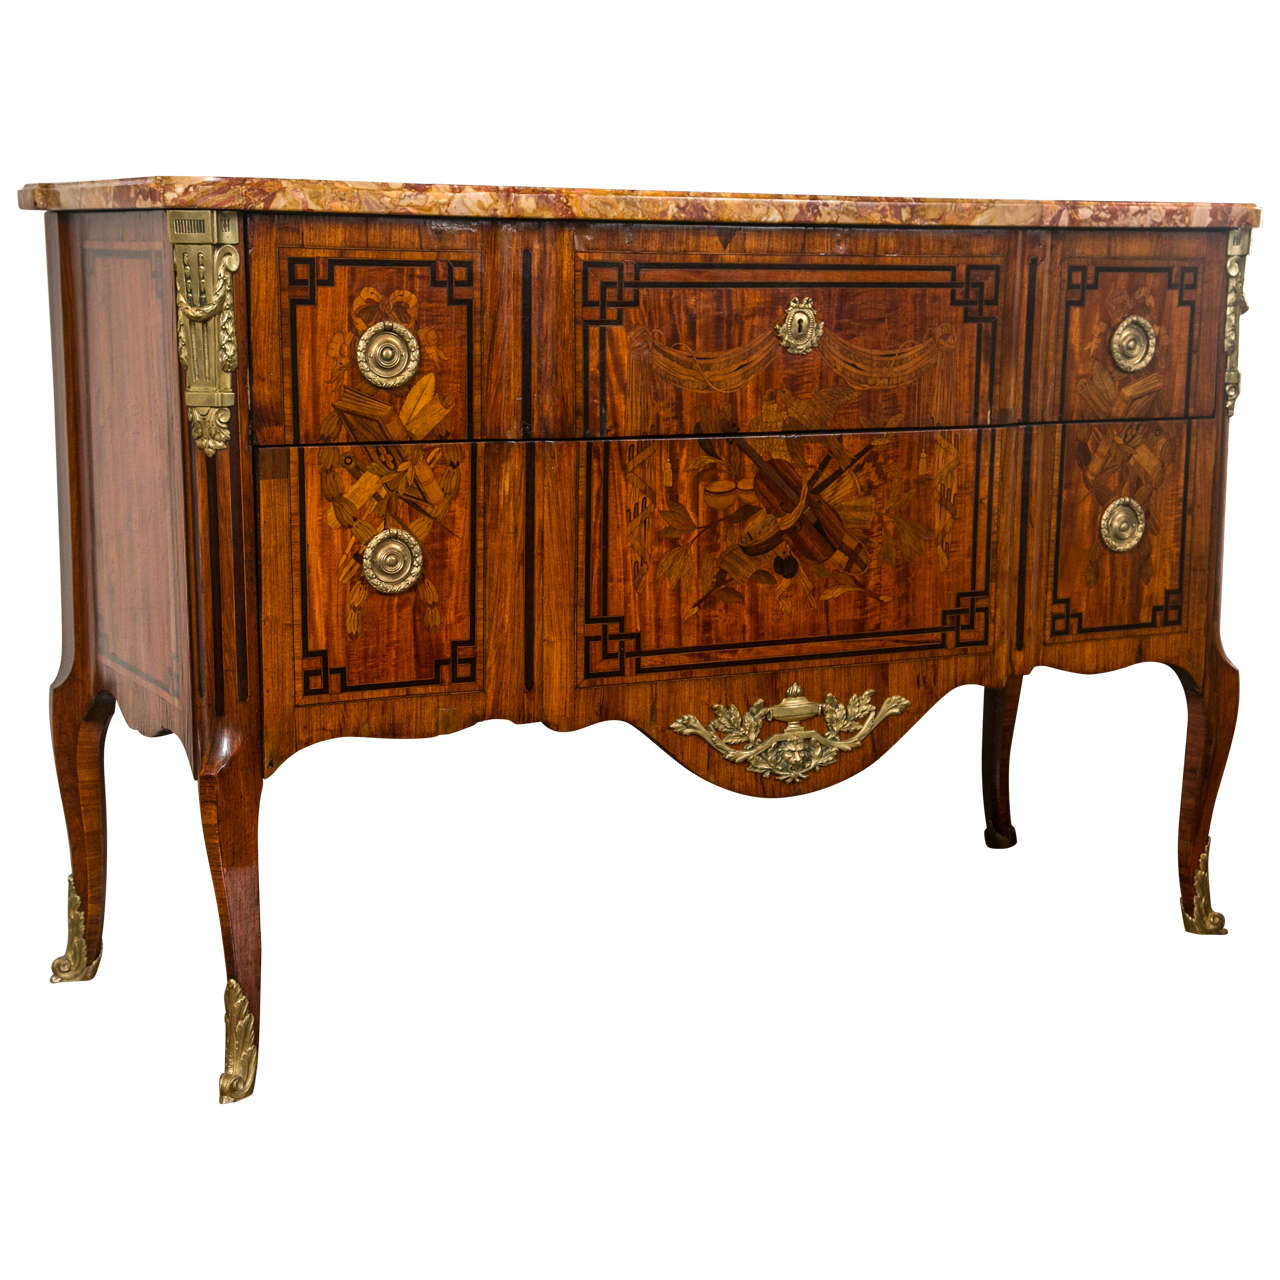 19th Century French Marquetry Marble Top Commode w/ Stunning Musical Inlays